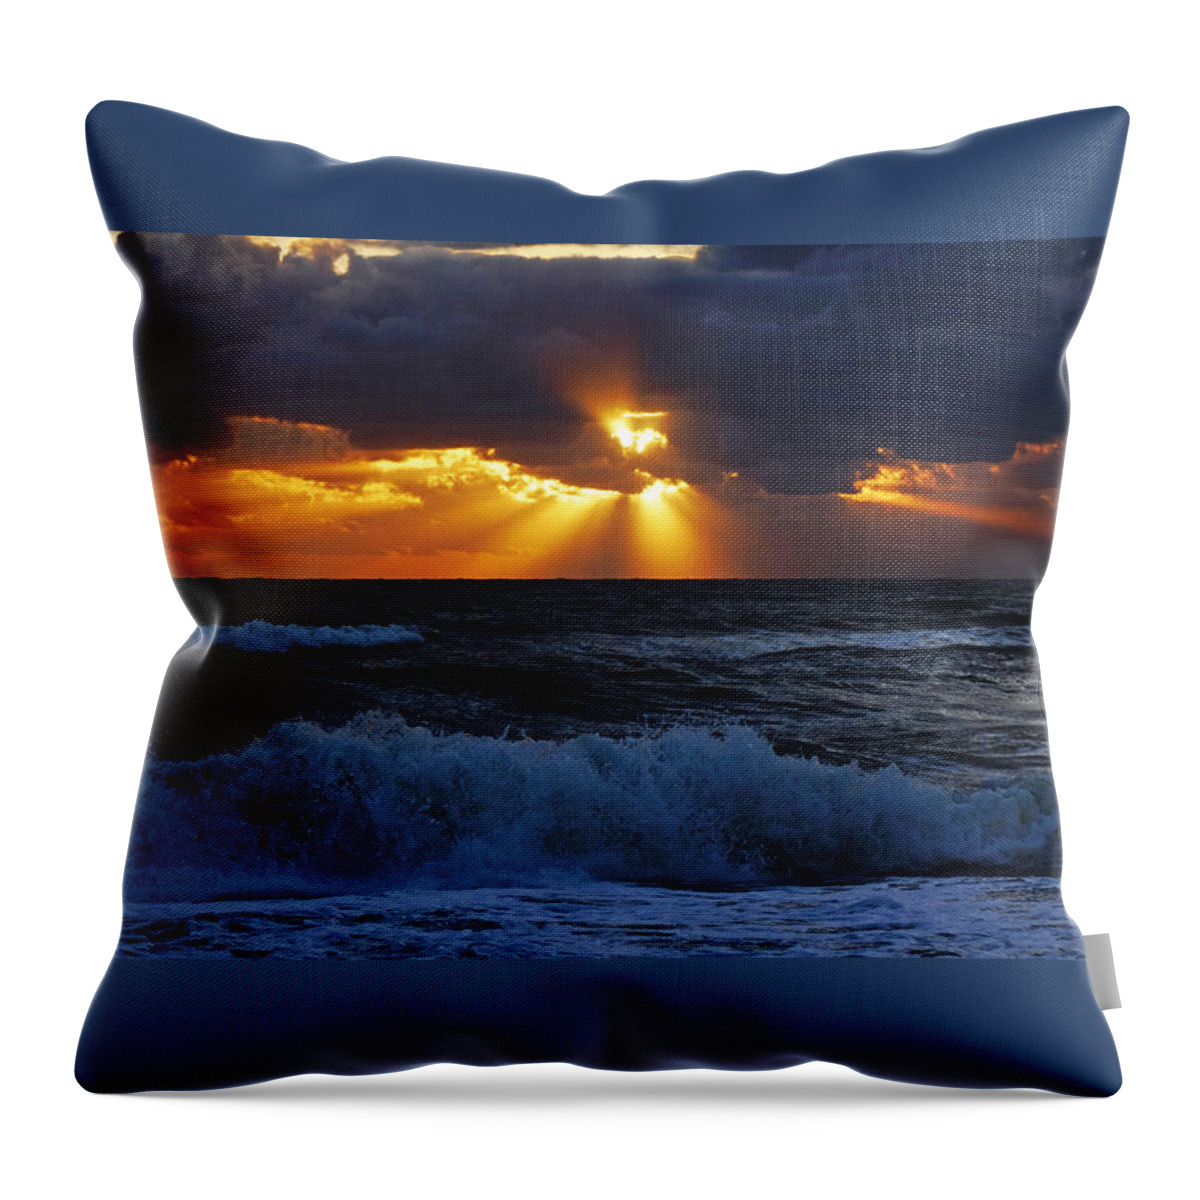 Florida Throw Pillow featuring the photograph Glorious Rays Sunrise Delray Beach by Lawrence S Richardson Jr